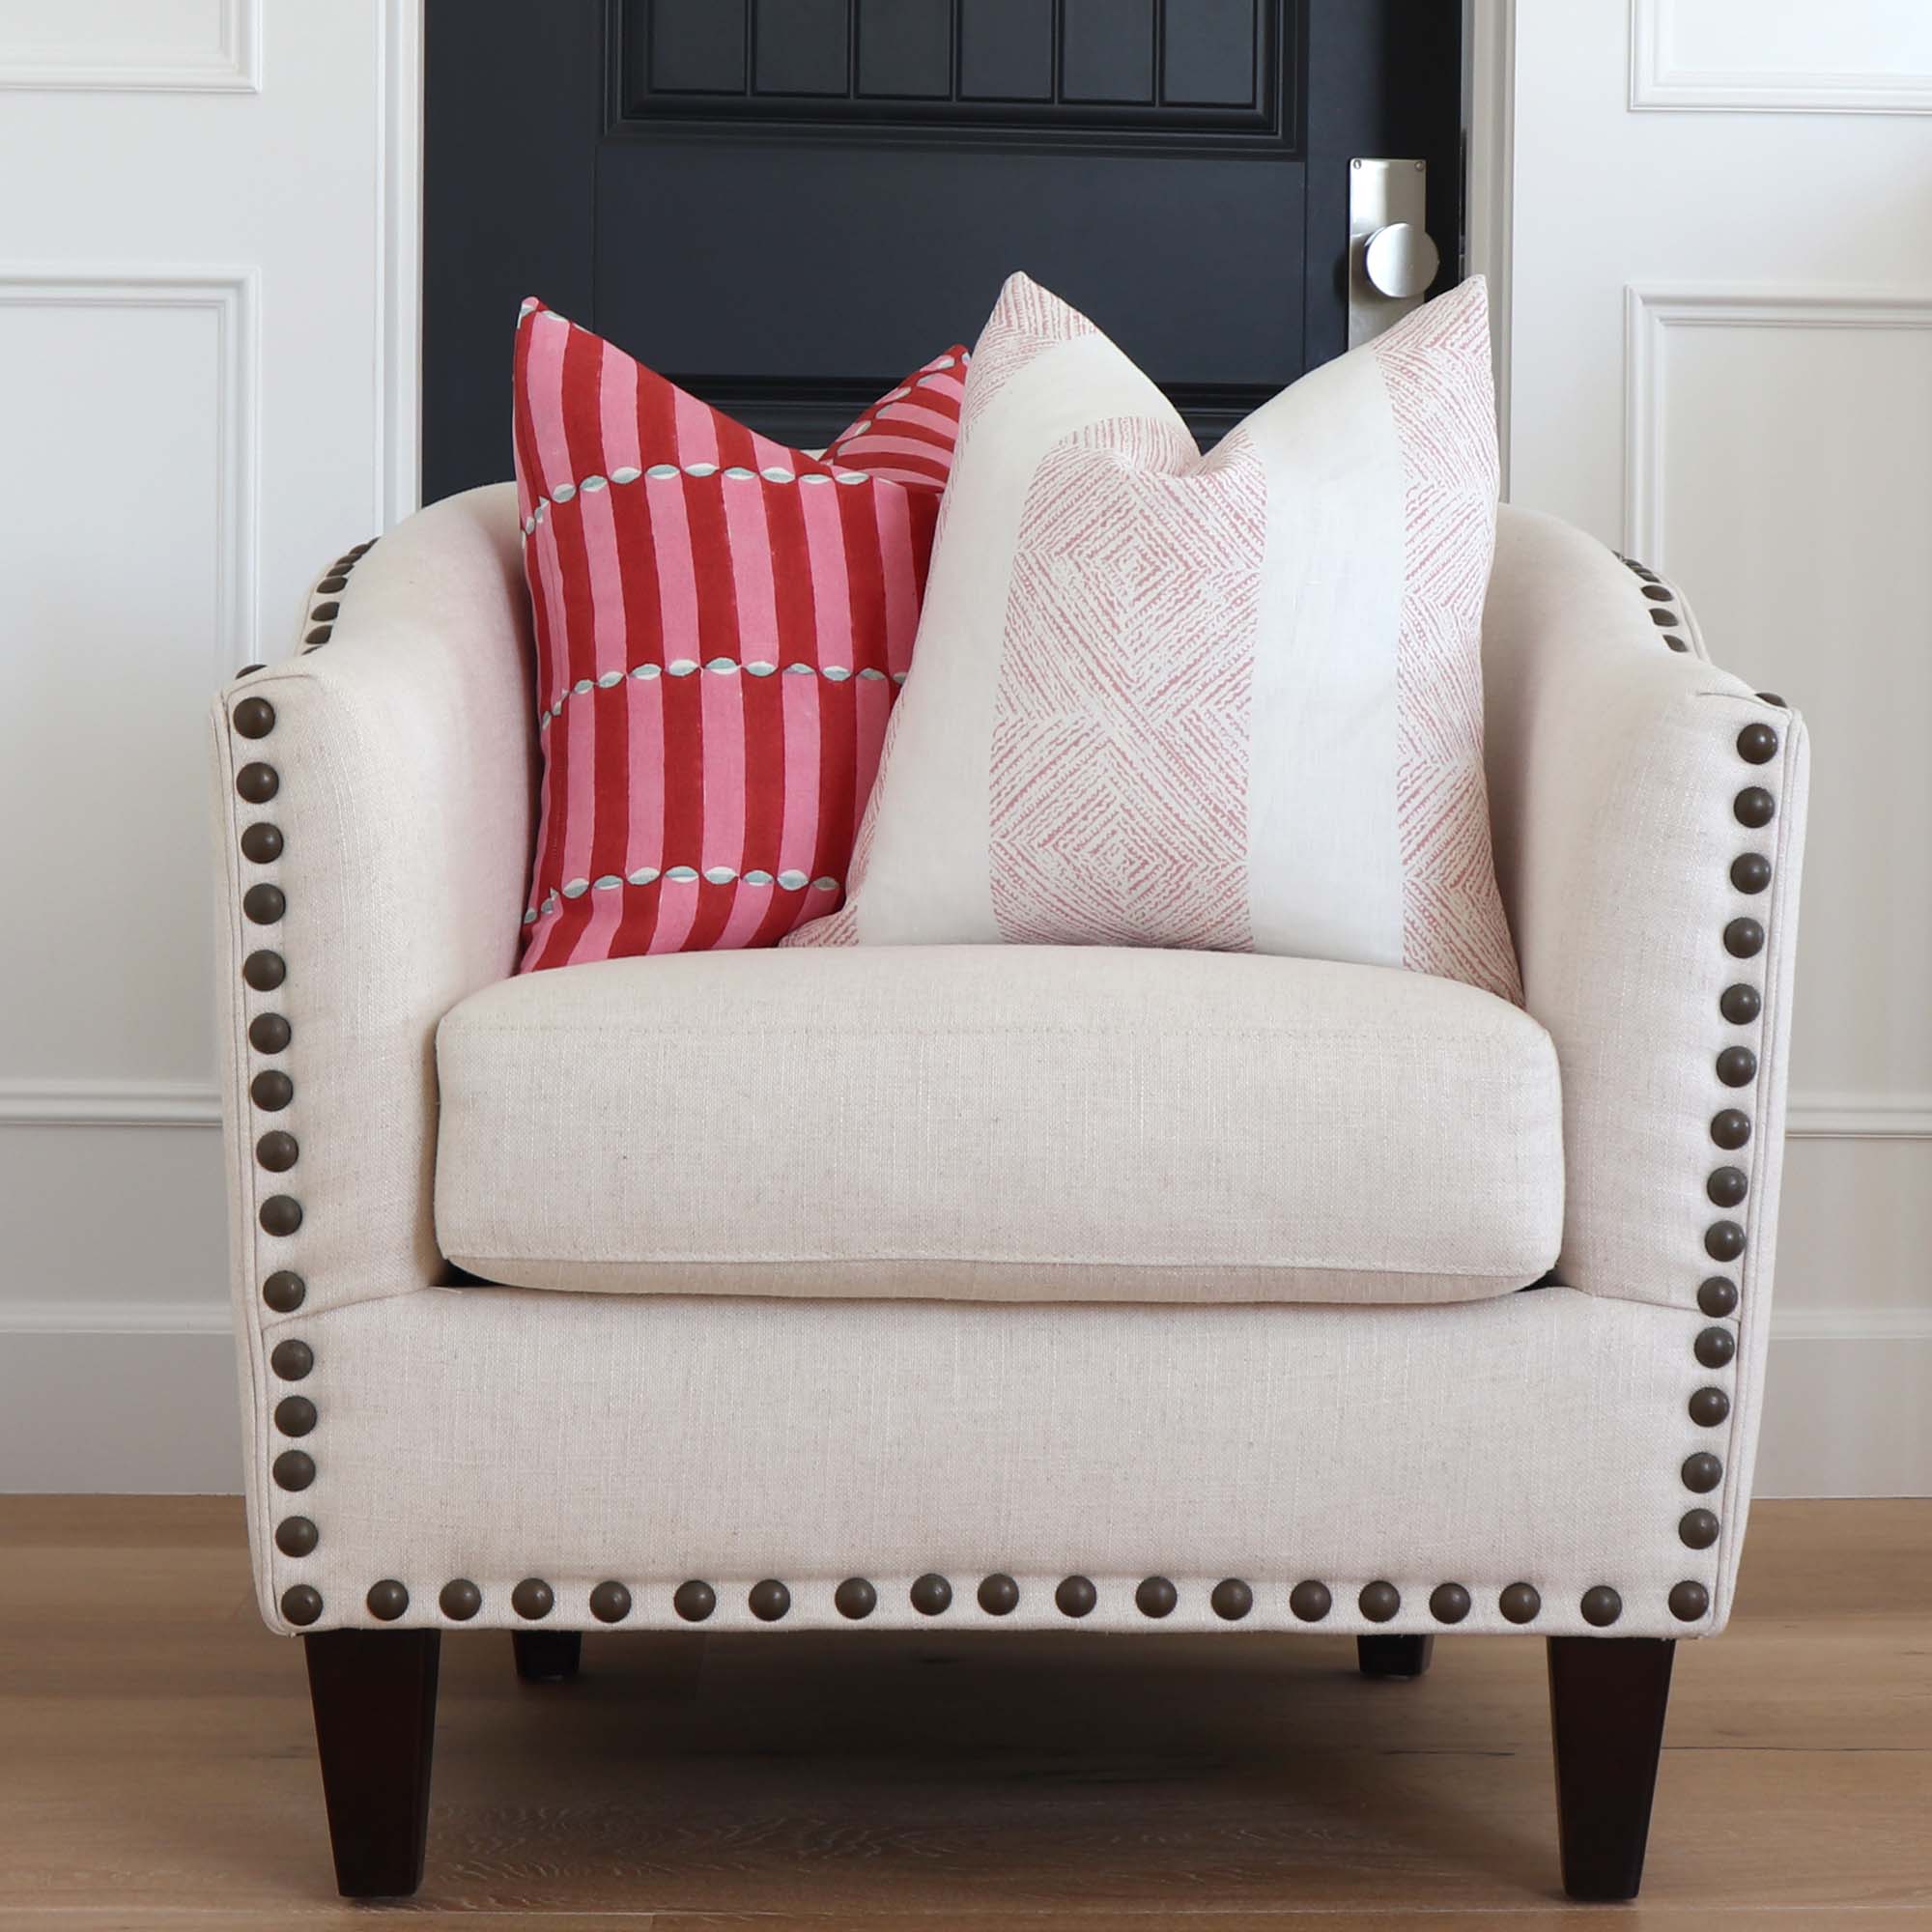 https://www.chloeandolive.com/cdn/shop/products/Schumacher-Luna-179280-Pink-Red-Graphic-Block-Print-Designer-Luxury-Decorative-Throw-Pillow-Cover-on-Accent-Chair-in-Home-Decor_5000x.jpg?v=1650769370